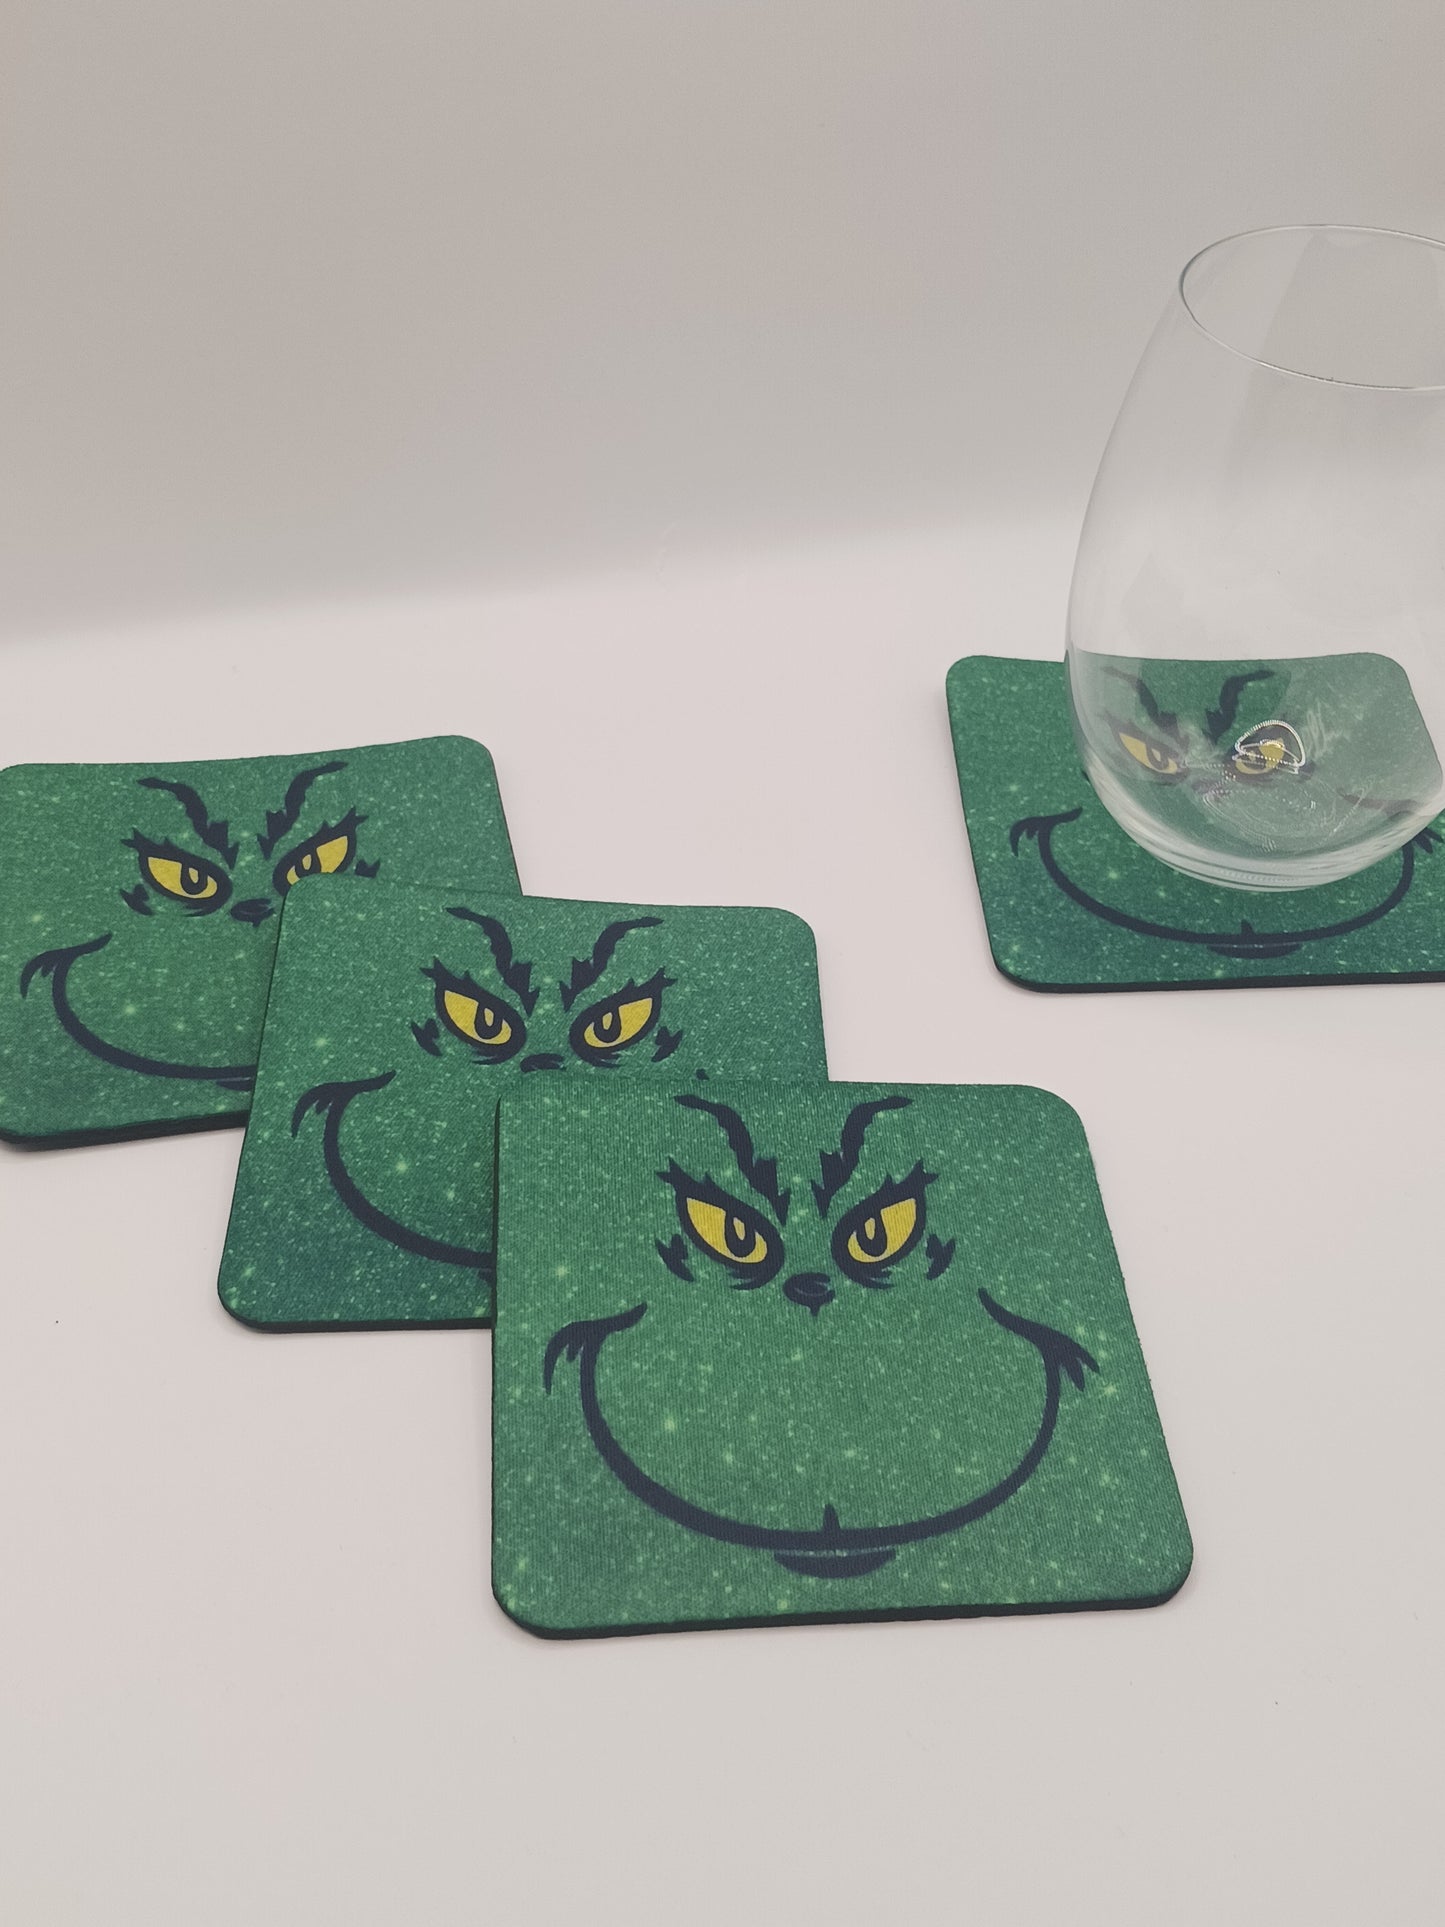 The Christmas green guy tabletop coasters